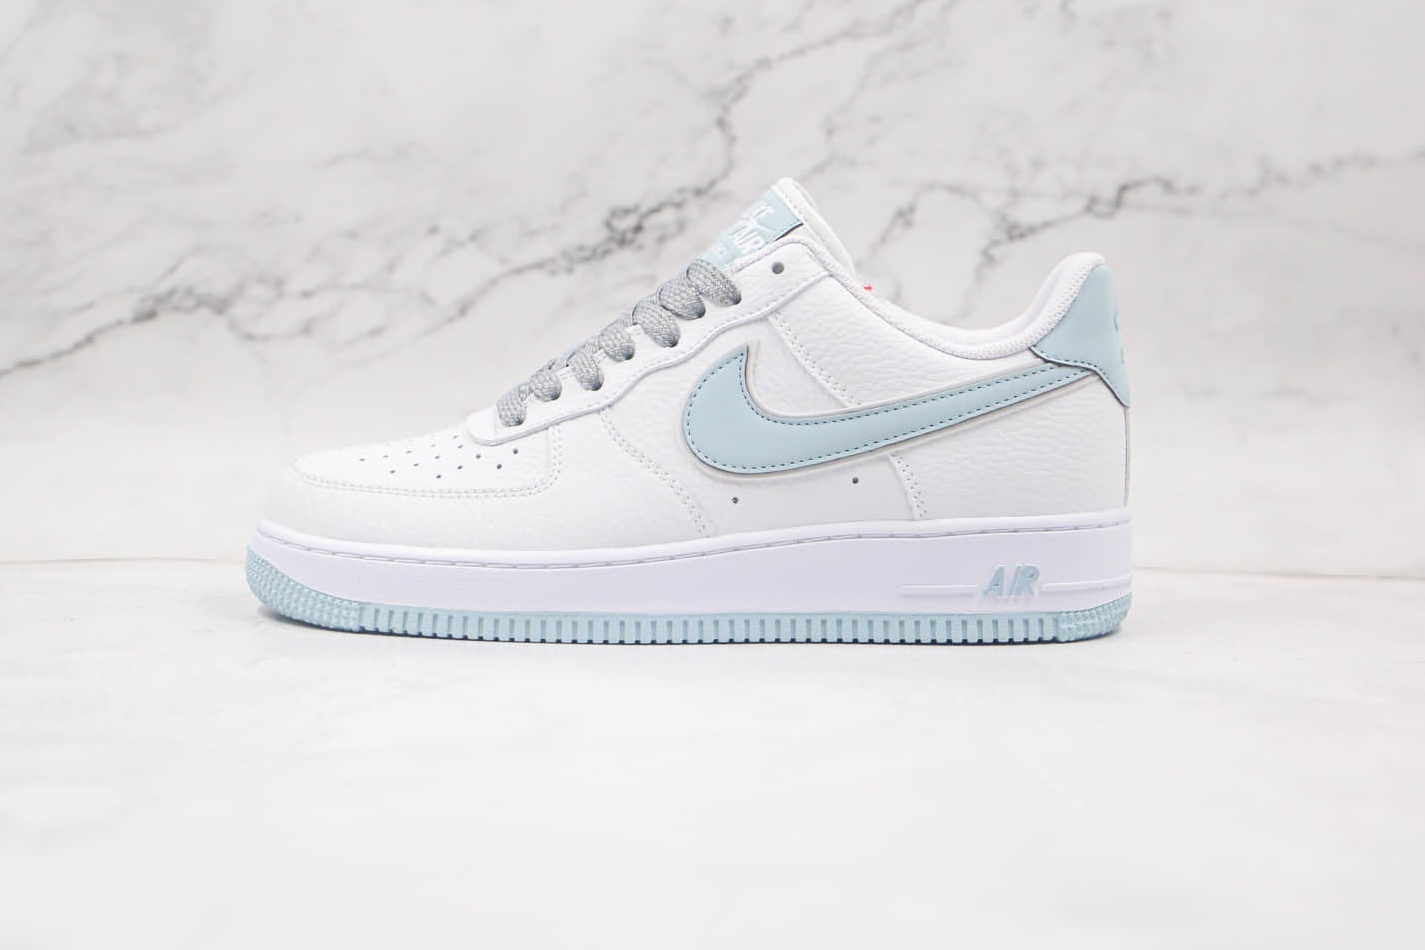 Nike Air Force 1 07 SU19 Low White Ice Blue AQ2566-201 - Stylish and Comfortable Sneakers.